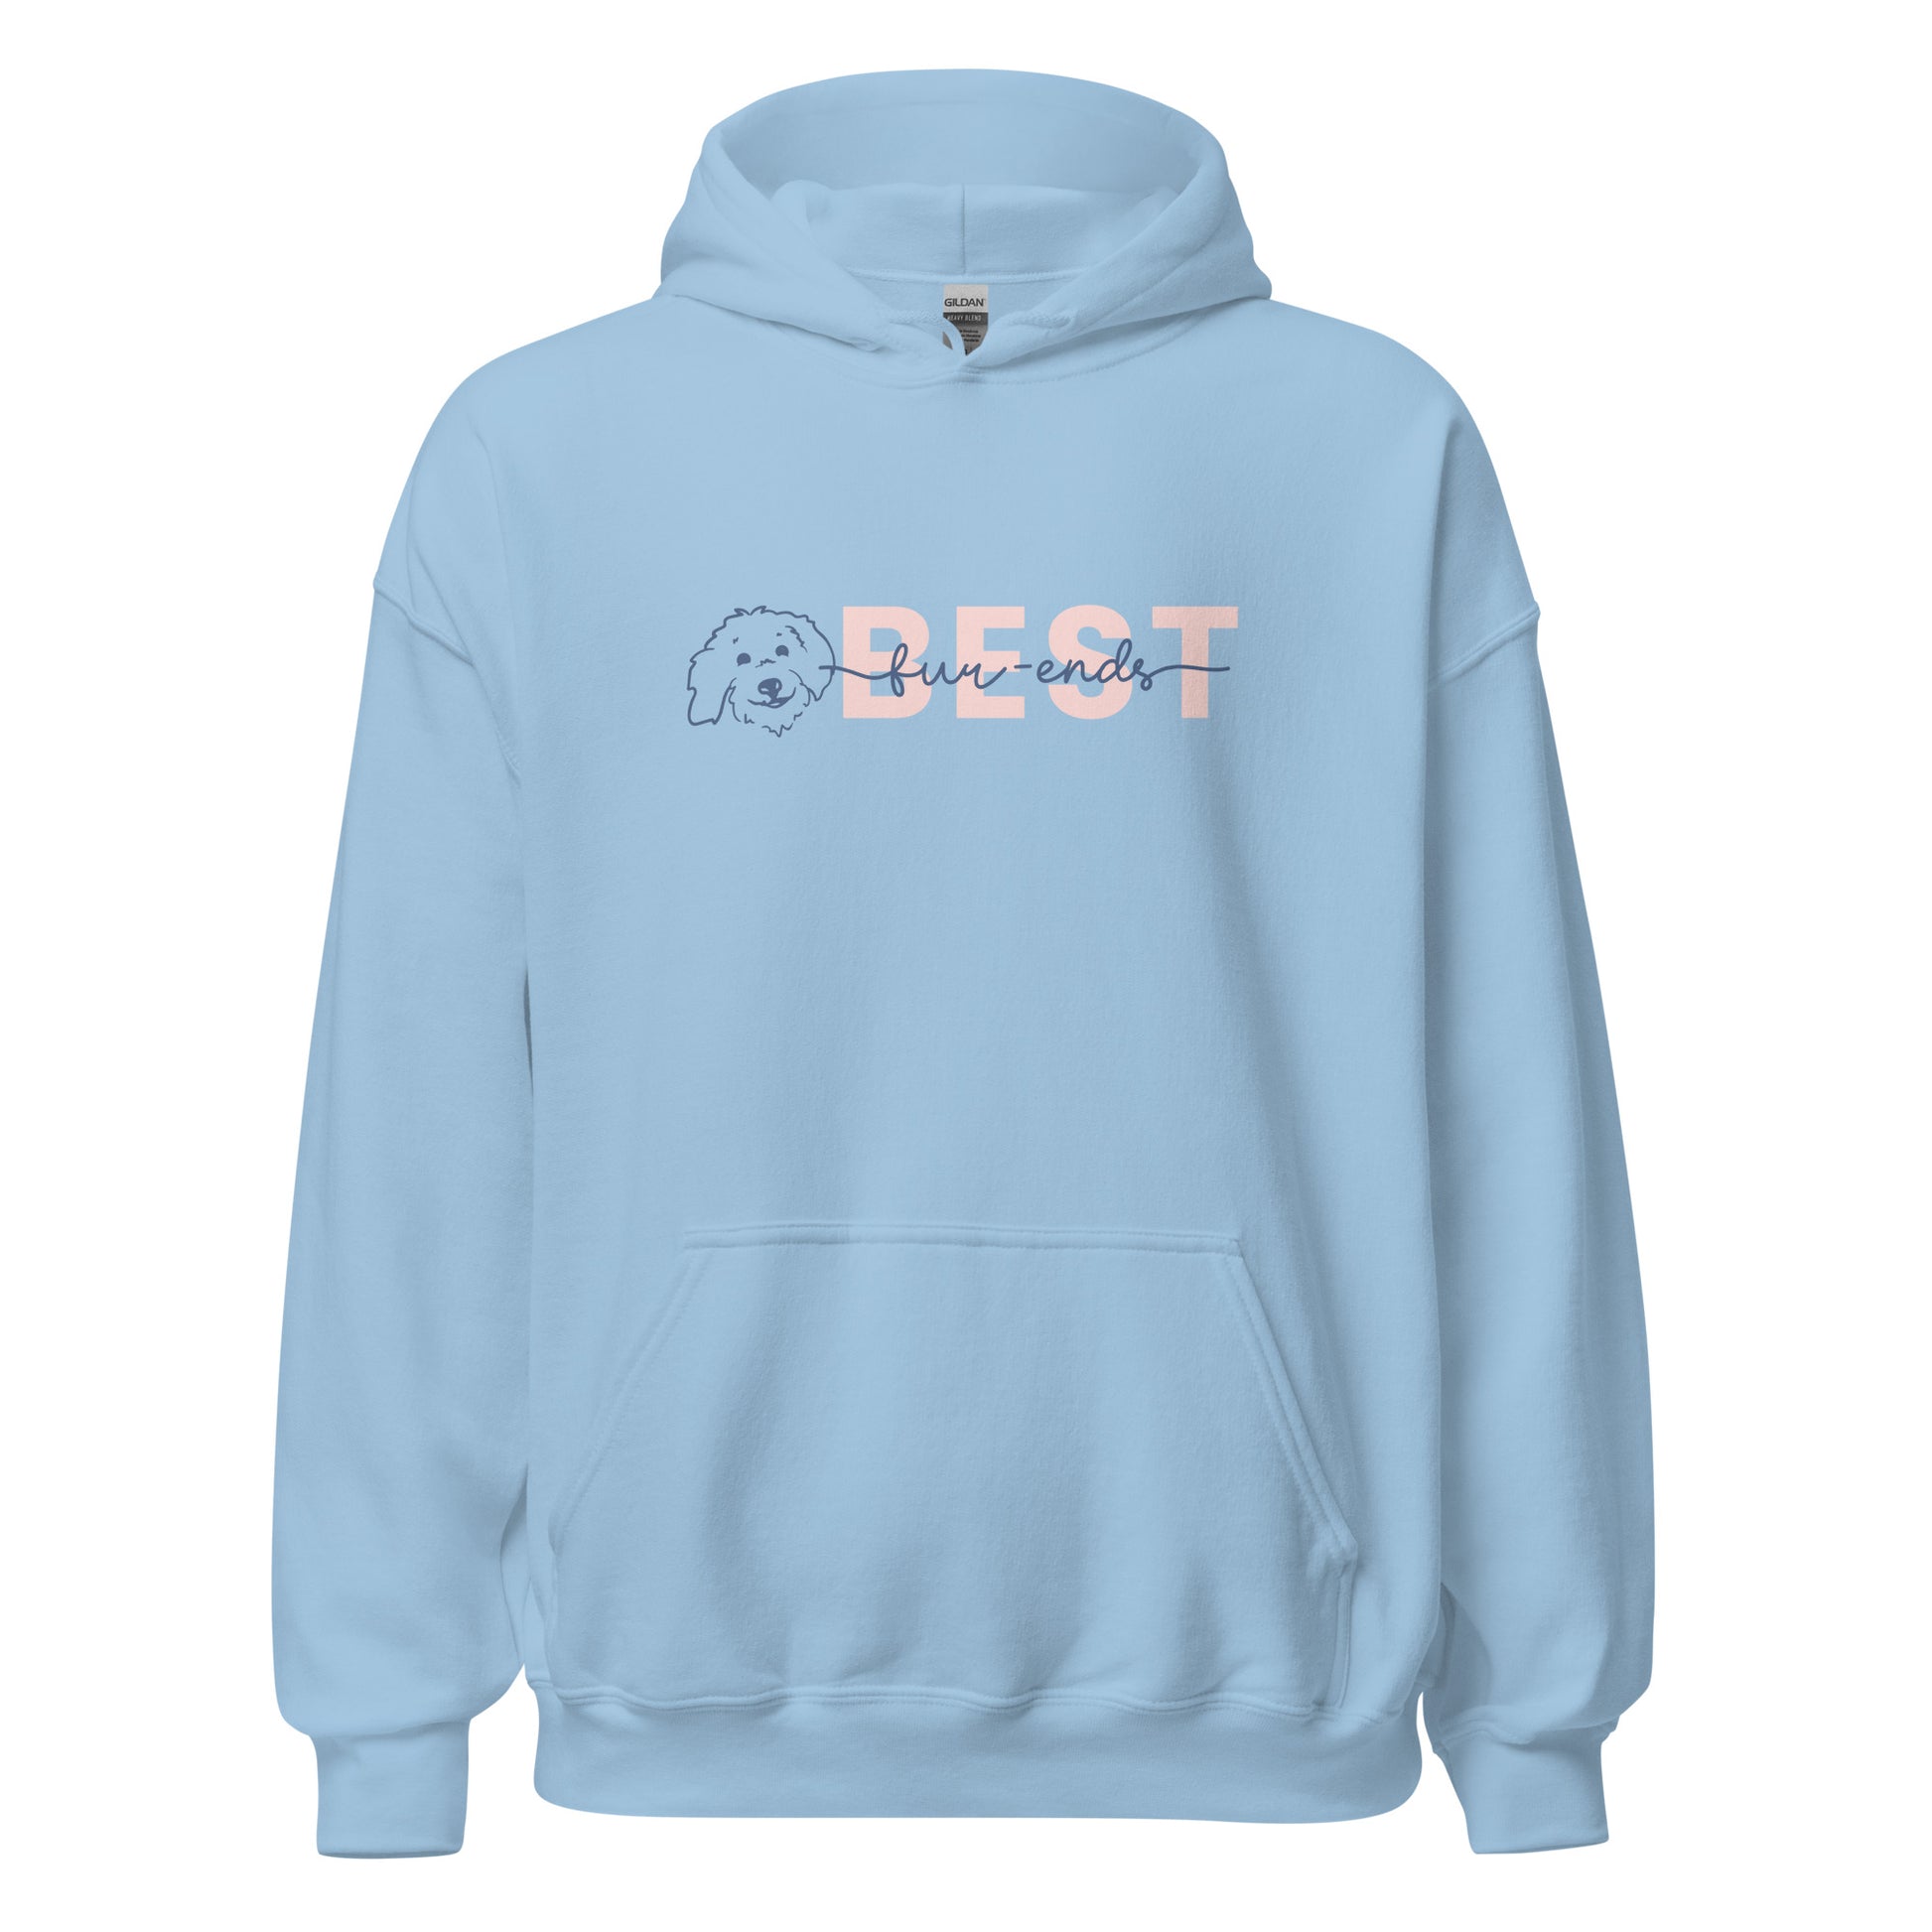 Goldendoodle hoodie sweatshirt with Goldendoodle face and words "Best fur-Ends" in light blue color